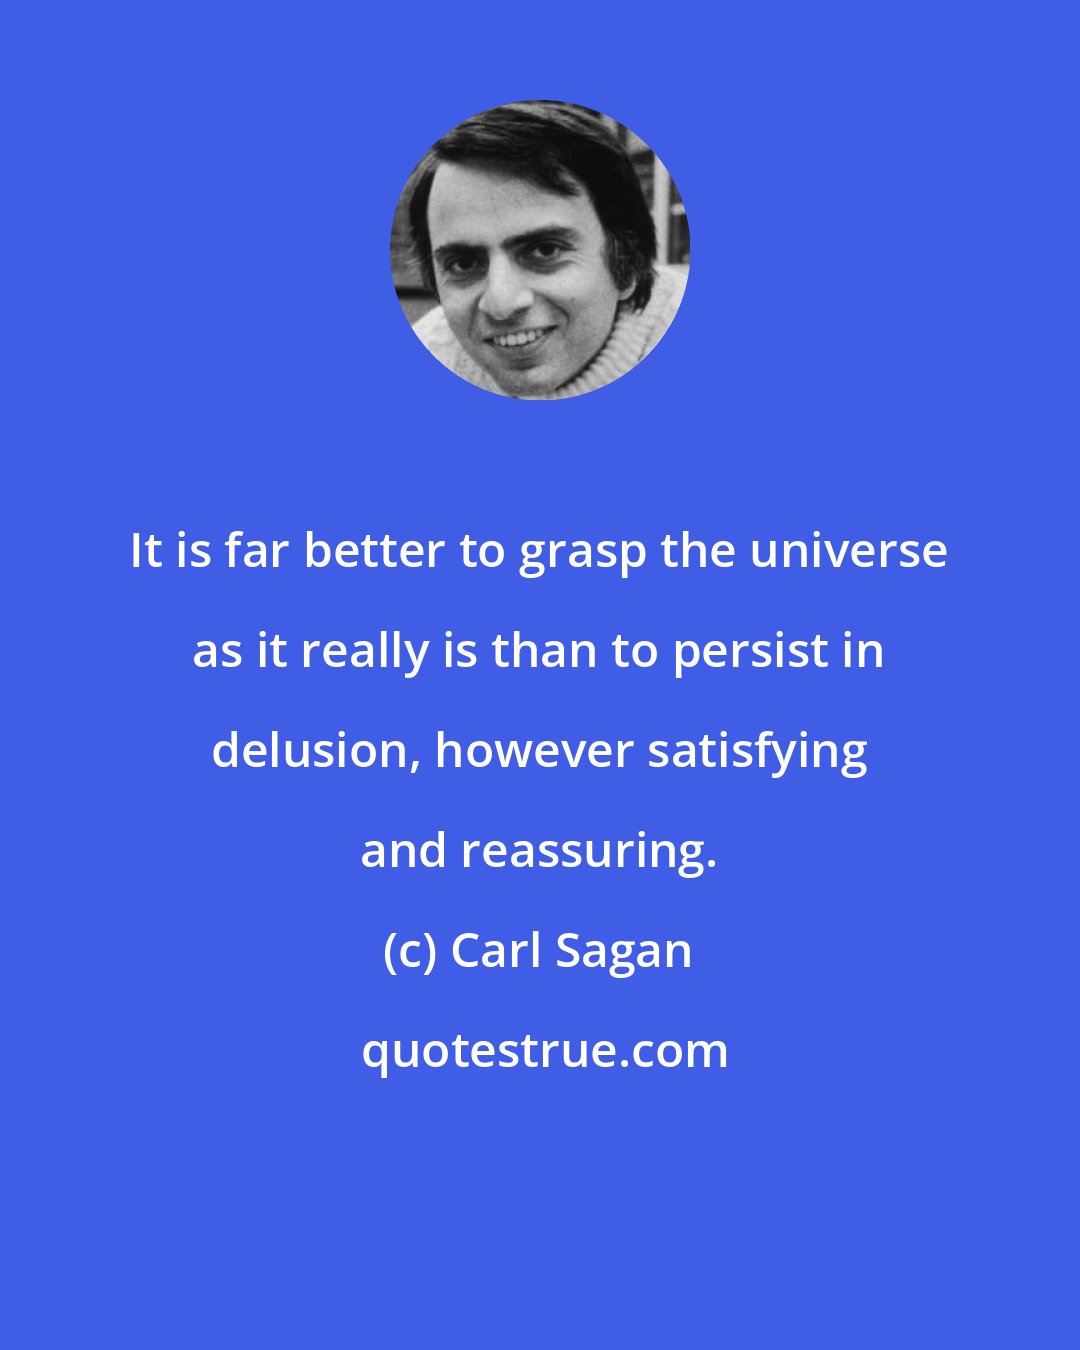 Carl Sagan: It is far better to grasp the universe as it really is than to persist in delusion, however satisfying and reassuring.